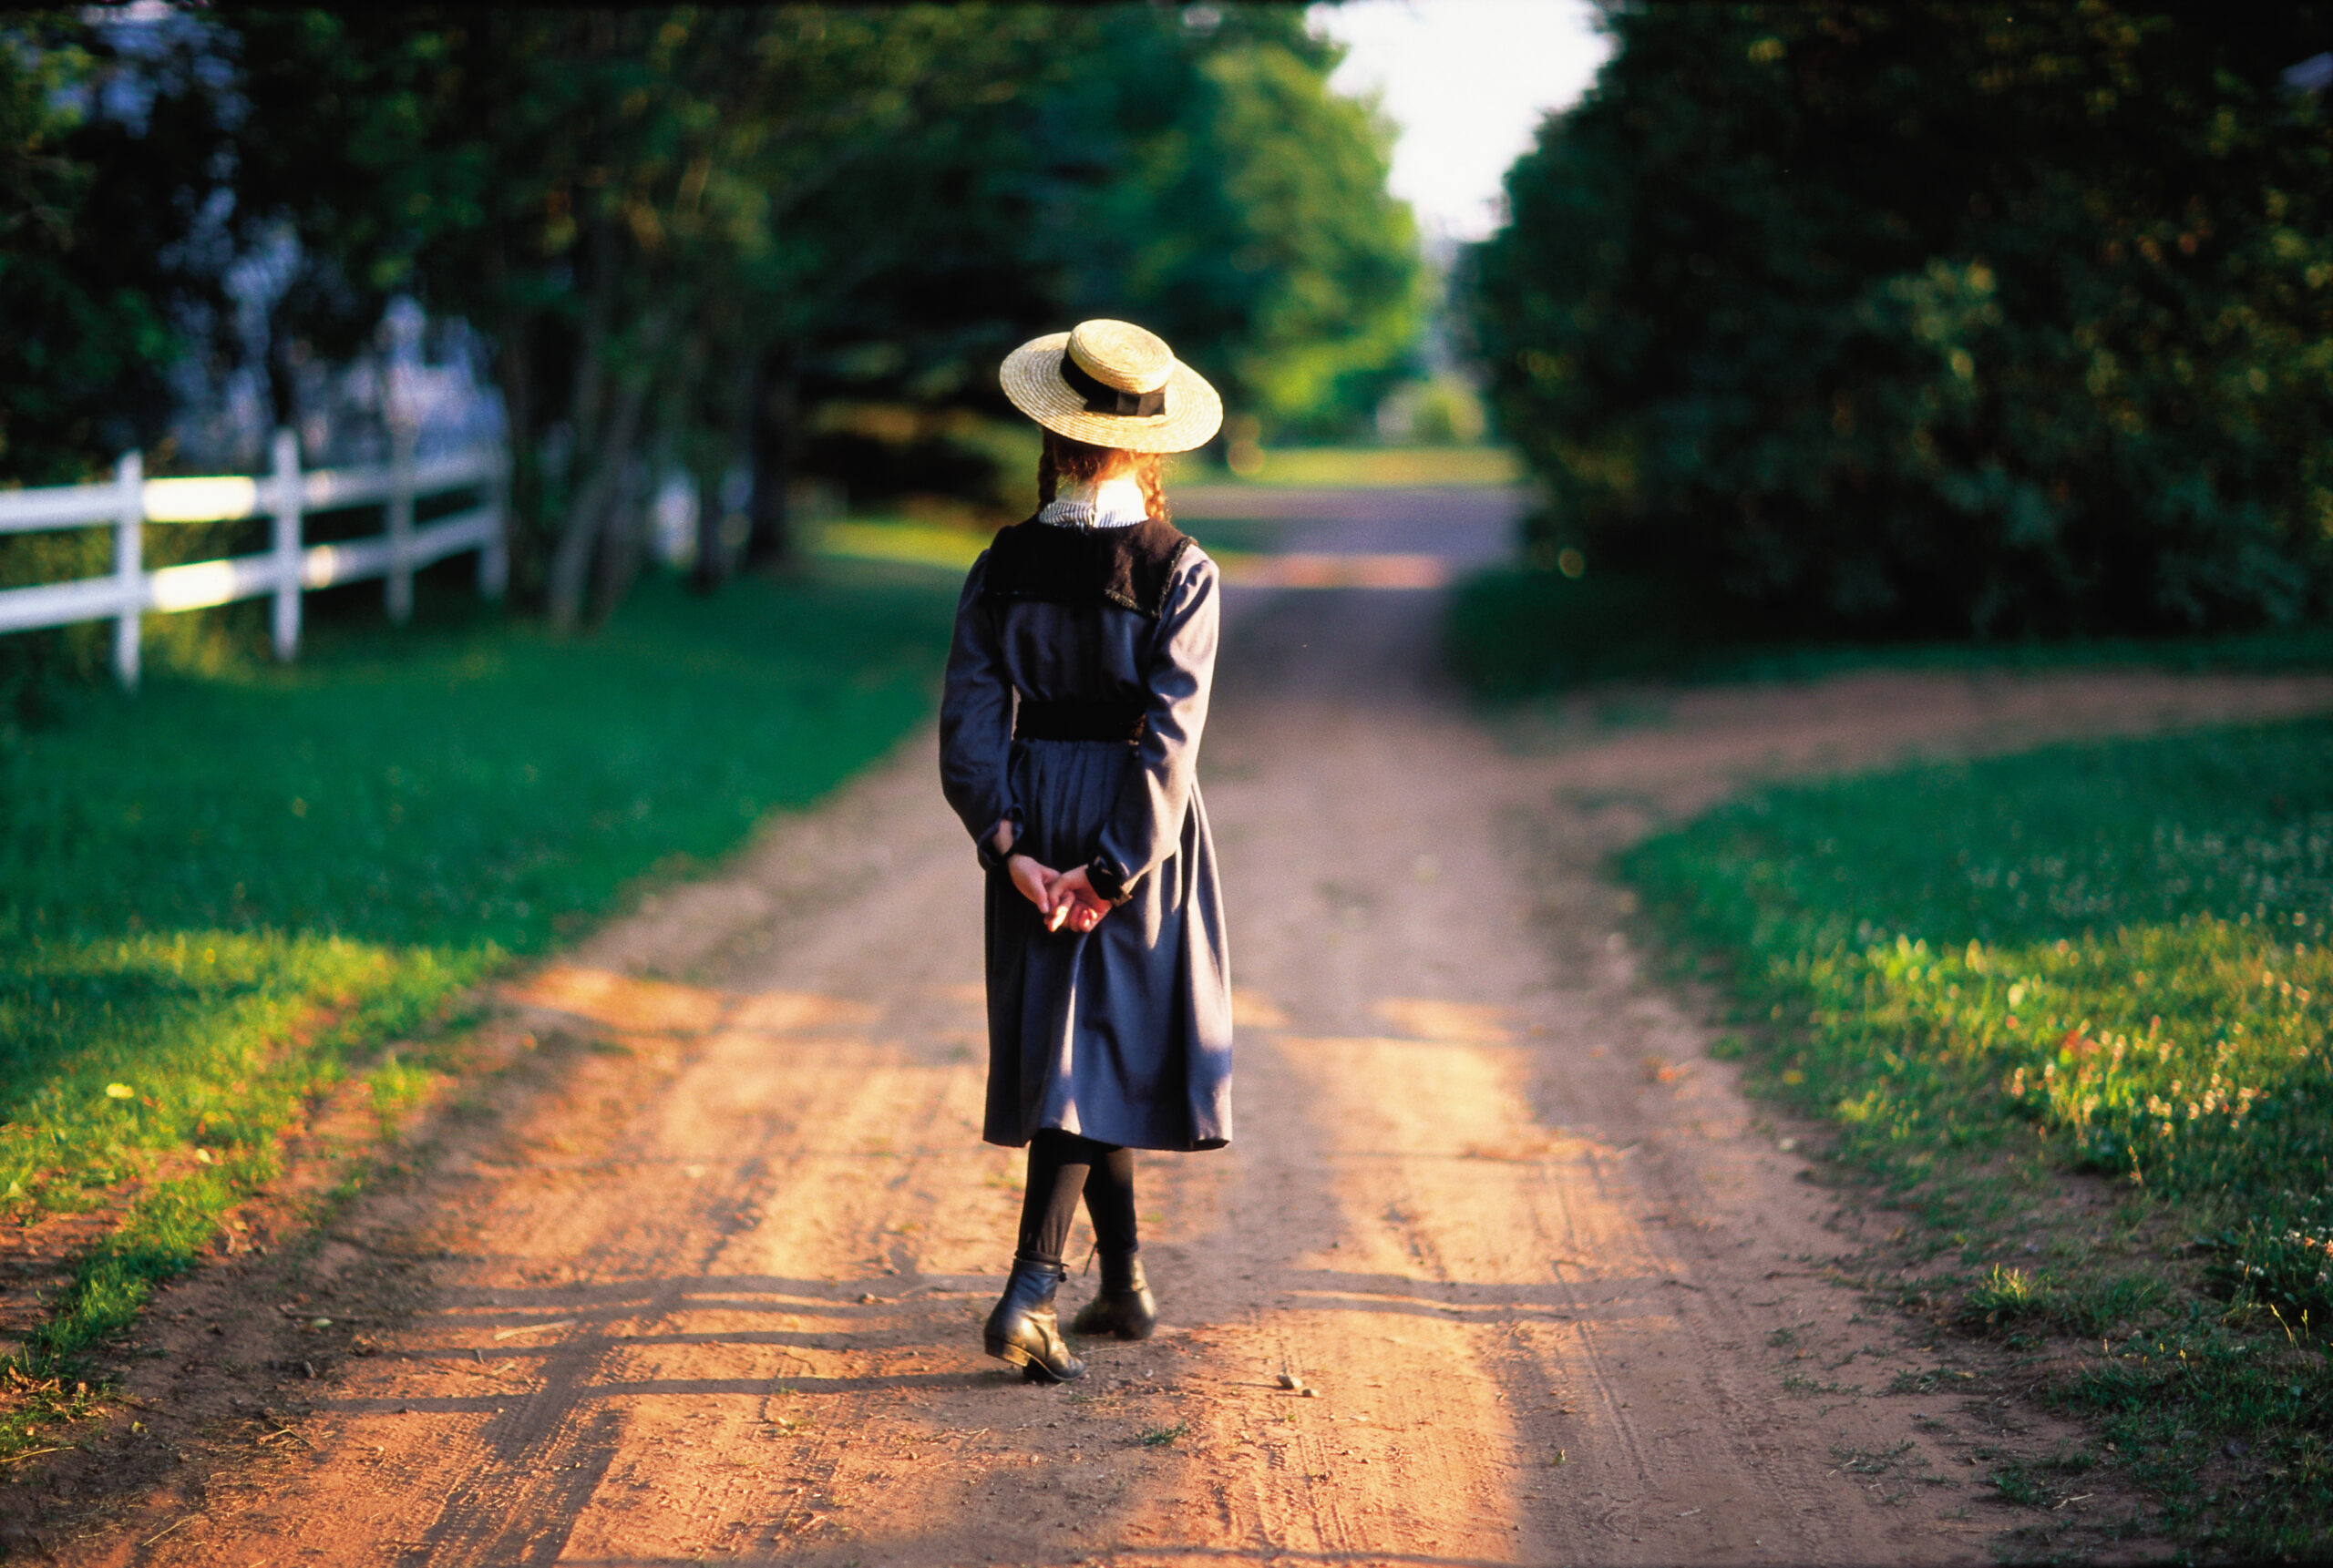 Anne of Green Gables on a dirt road